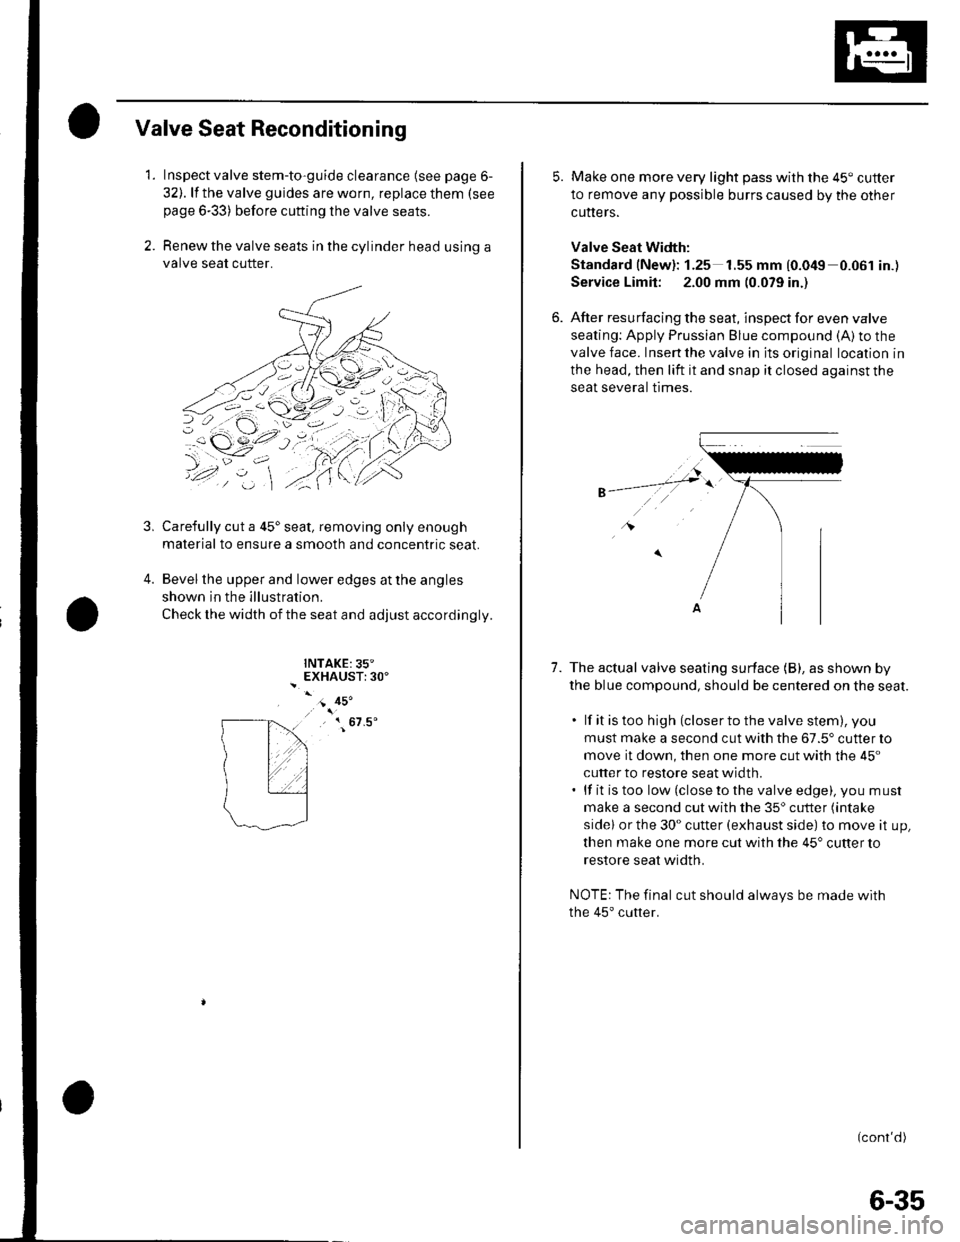 HONDA CIVIC 2003 7.G Workshop Manual Valve Seat Reconditioning
1. Inspect valve stem-to-guide clearance (see page 6-
32). lf the valve guides are worn, replace them (see
page 6-33) before cutting the valve seats.
2. Renew the valve seats